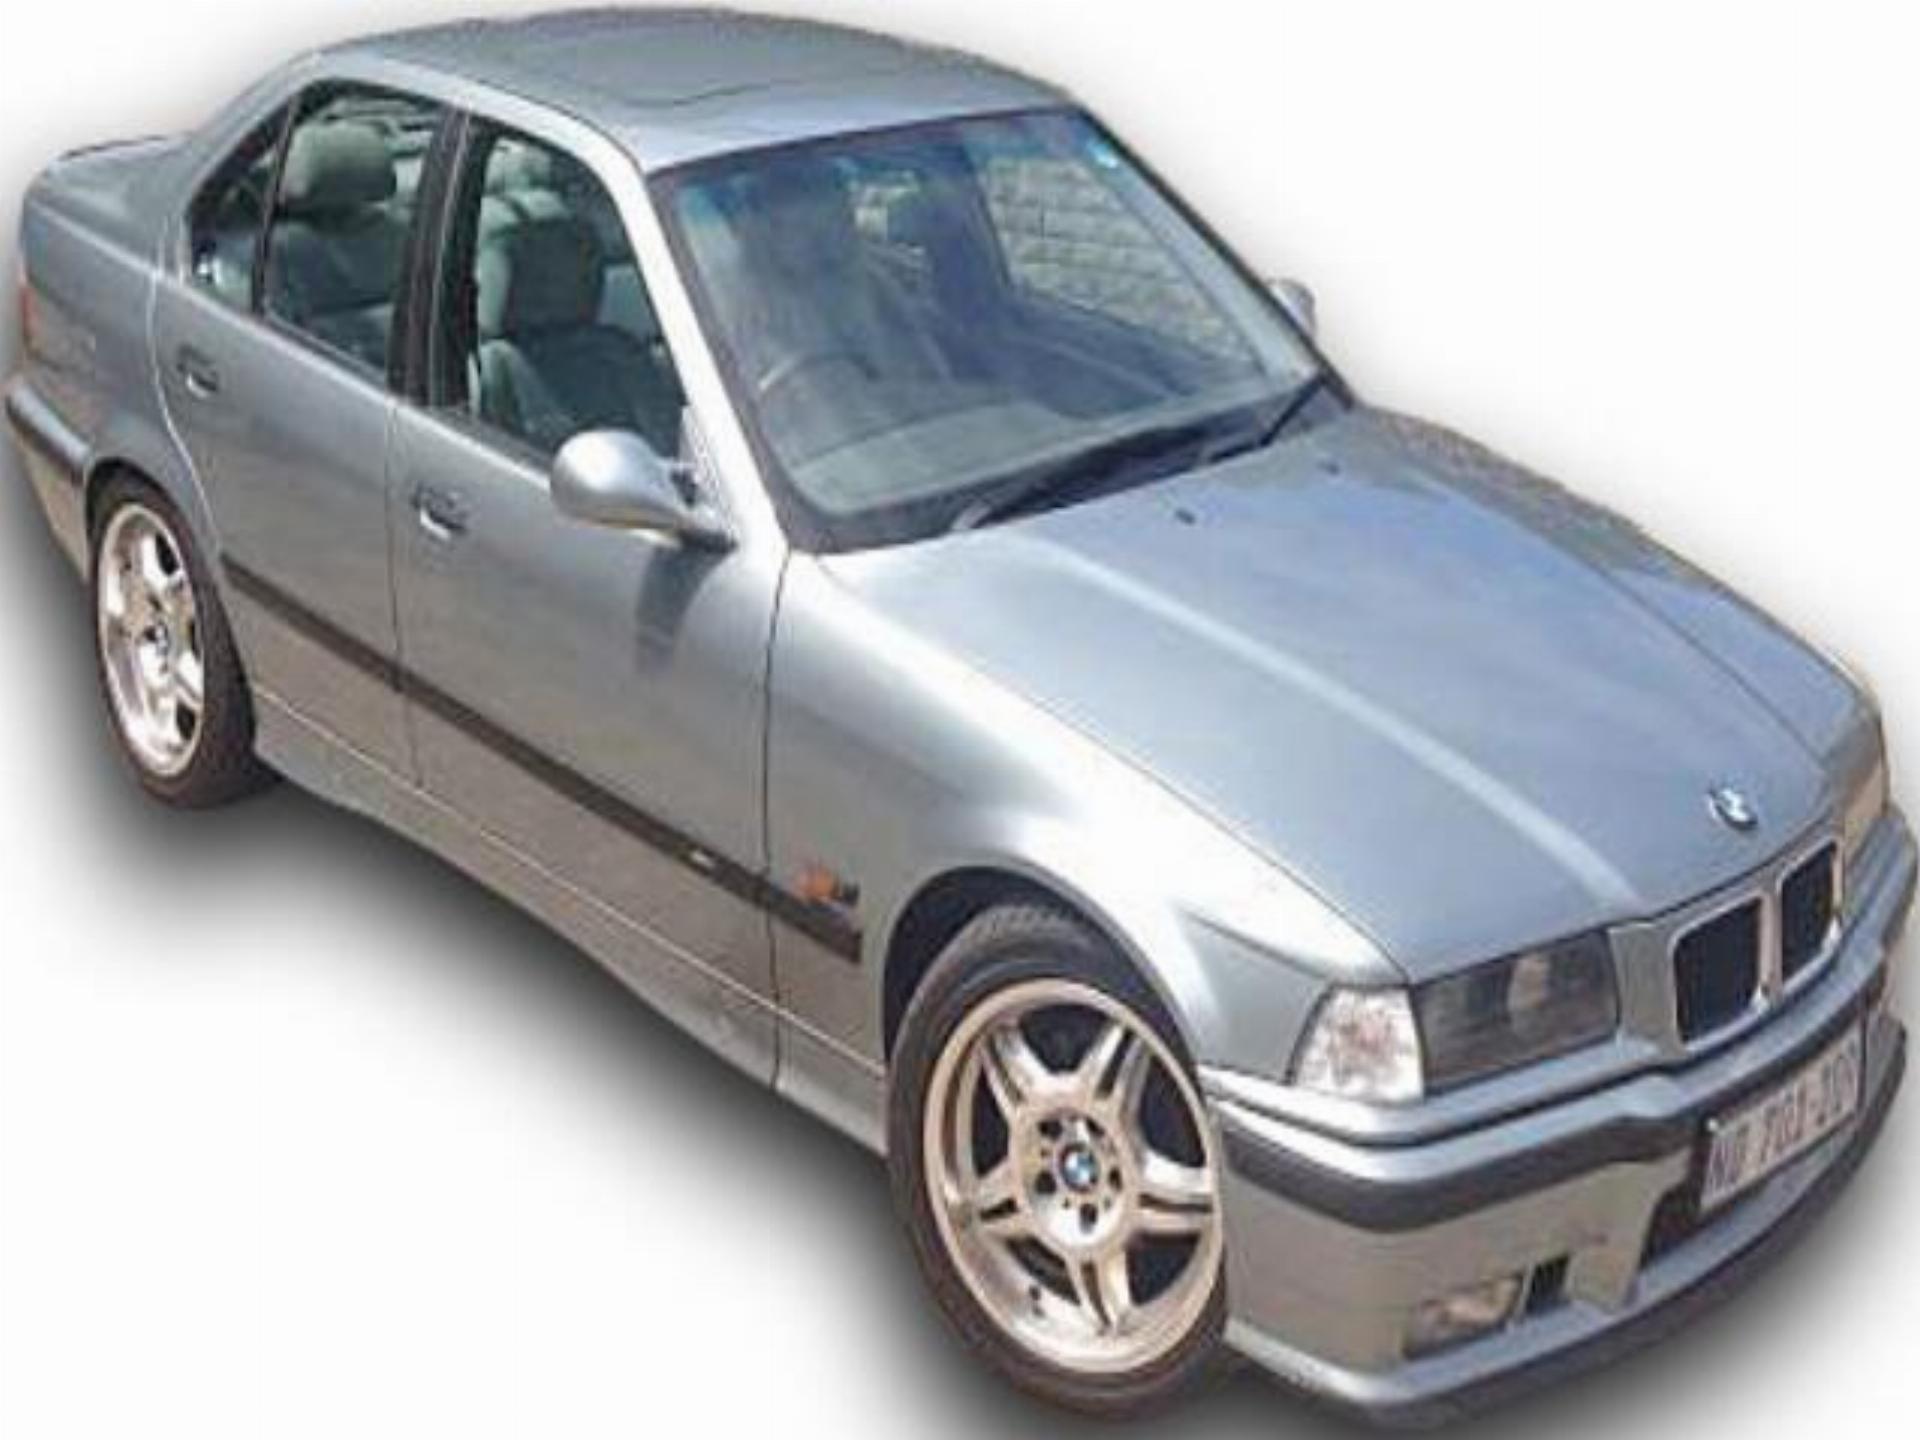 Used BMW 3 Series E36 328I 1997 on auction - PV1015369